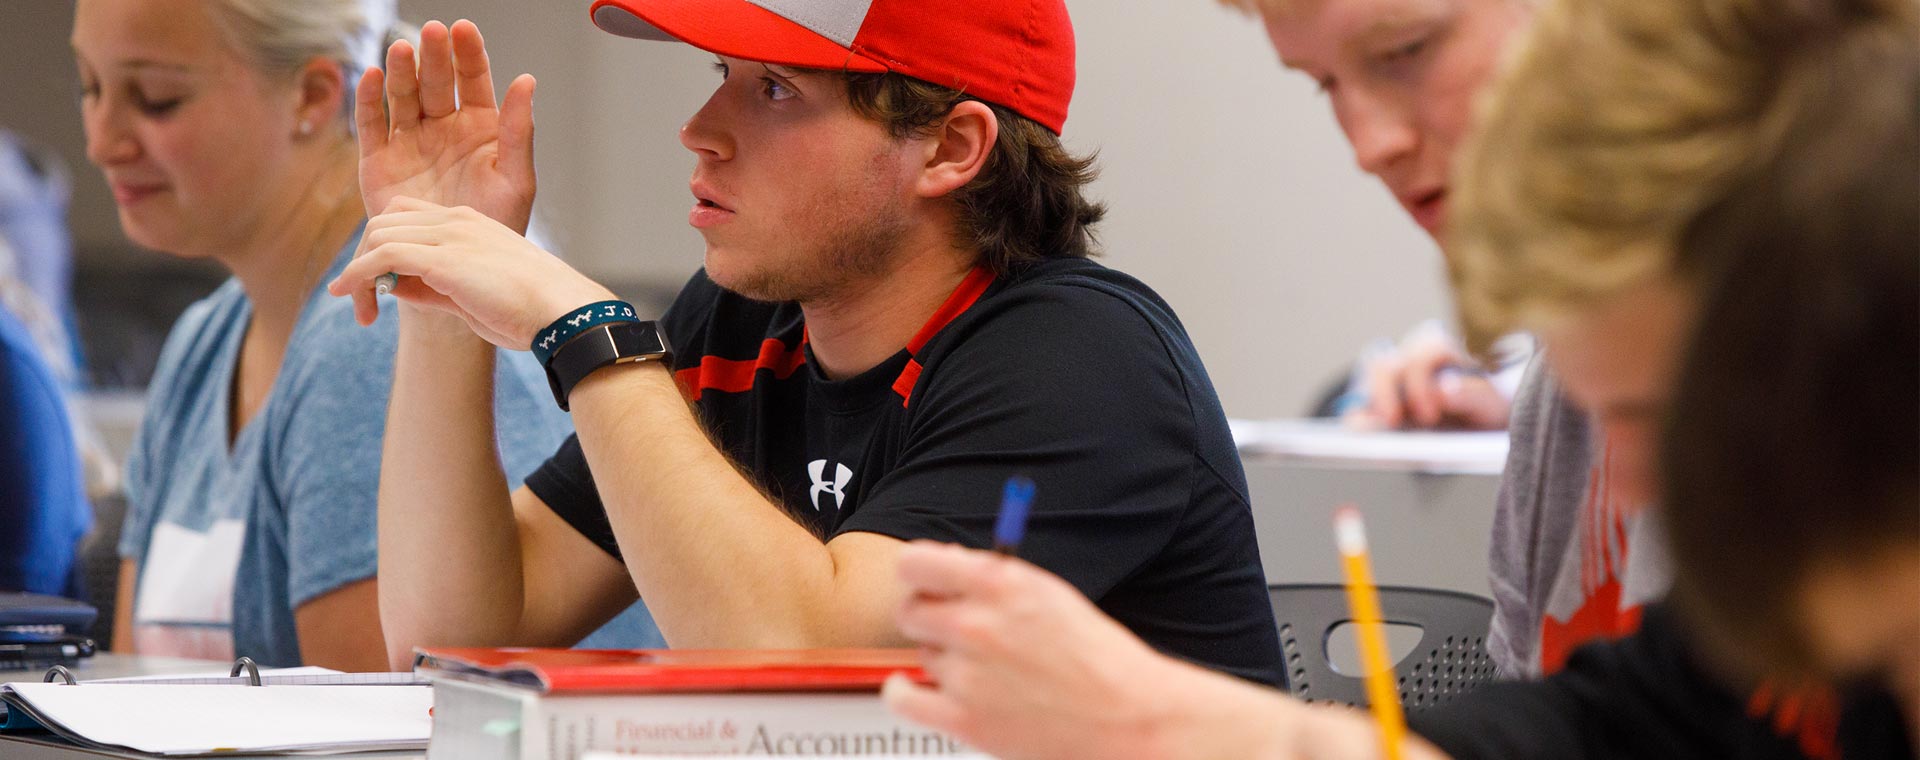 Our accounting students’ CPA exam pass rates are #1 in Iowa and #2 in the nation.